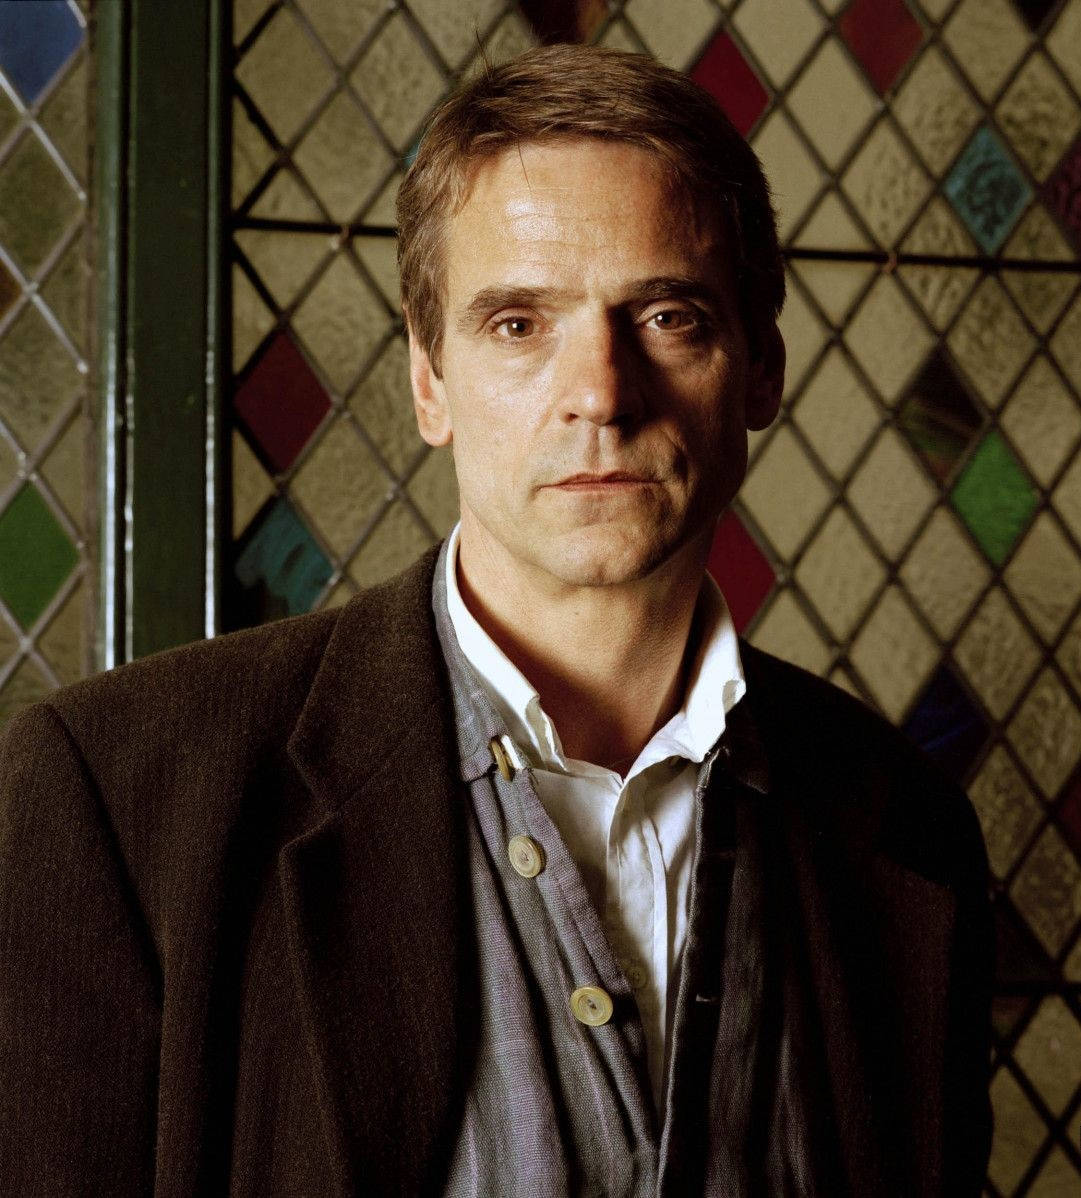 Jeremy Irons in 'The Time Machine' movie capture Wallpaper